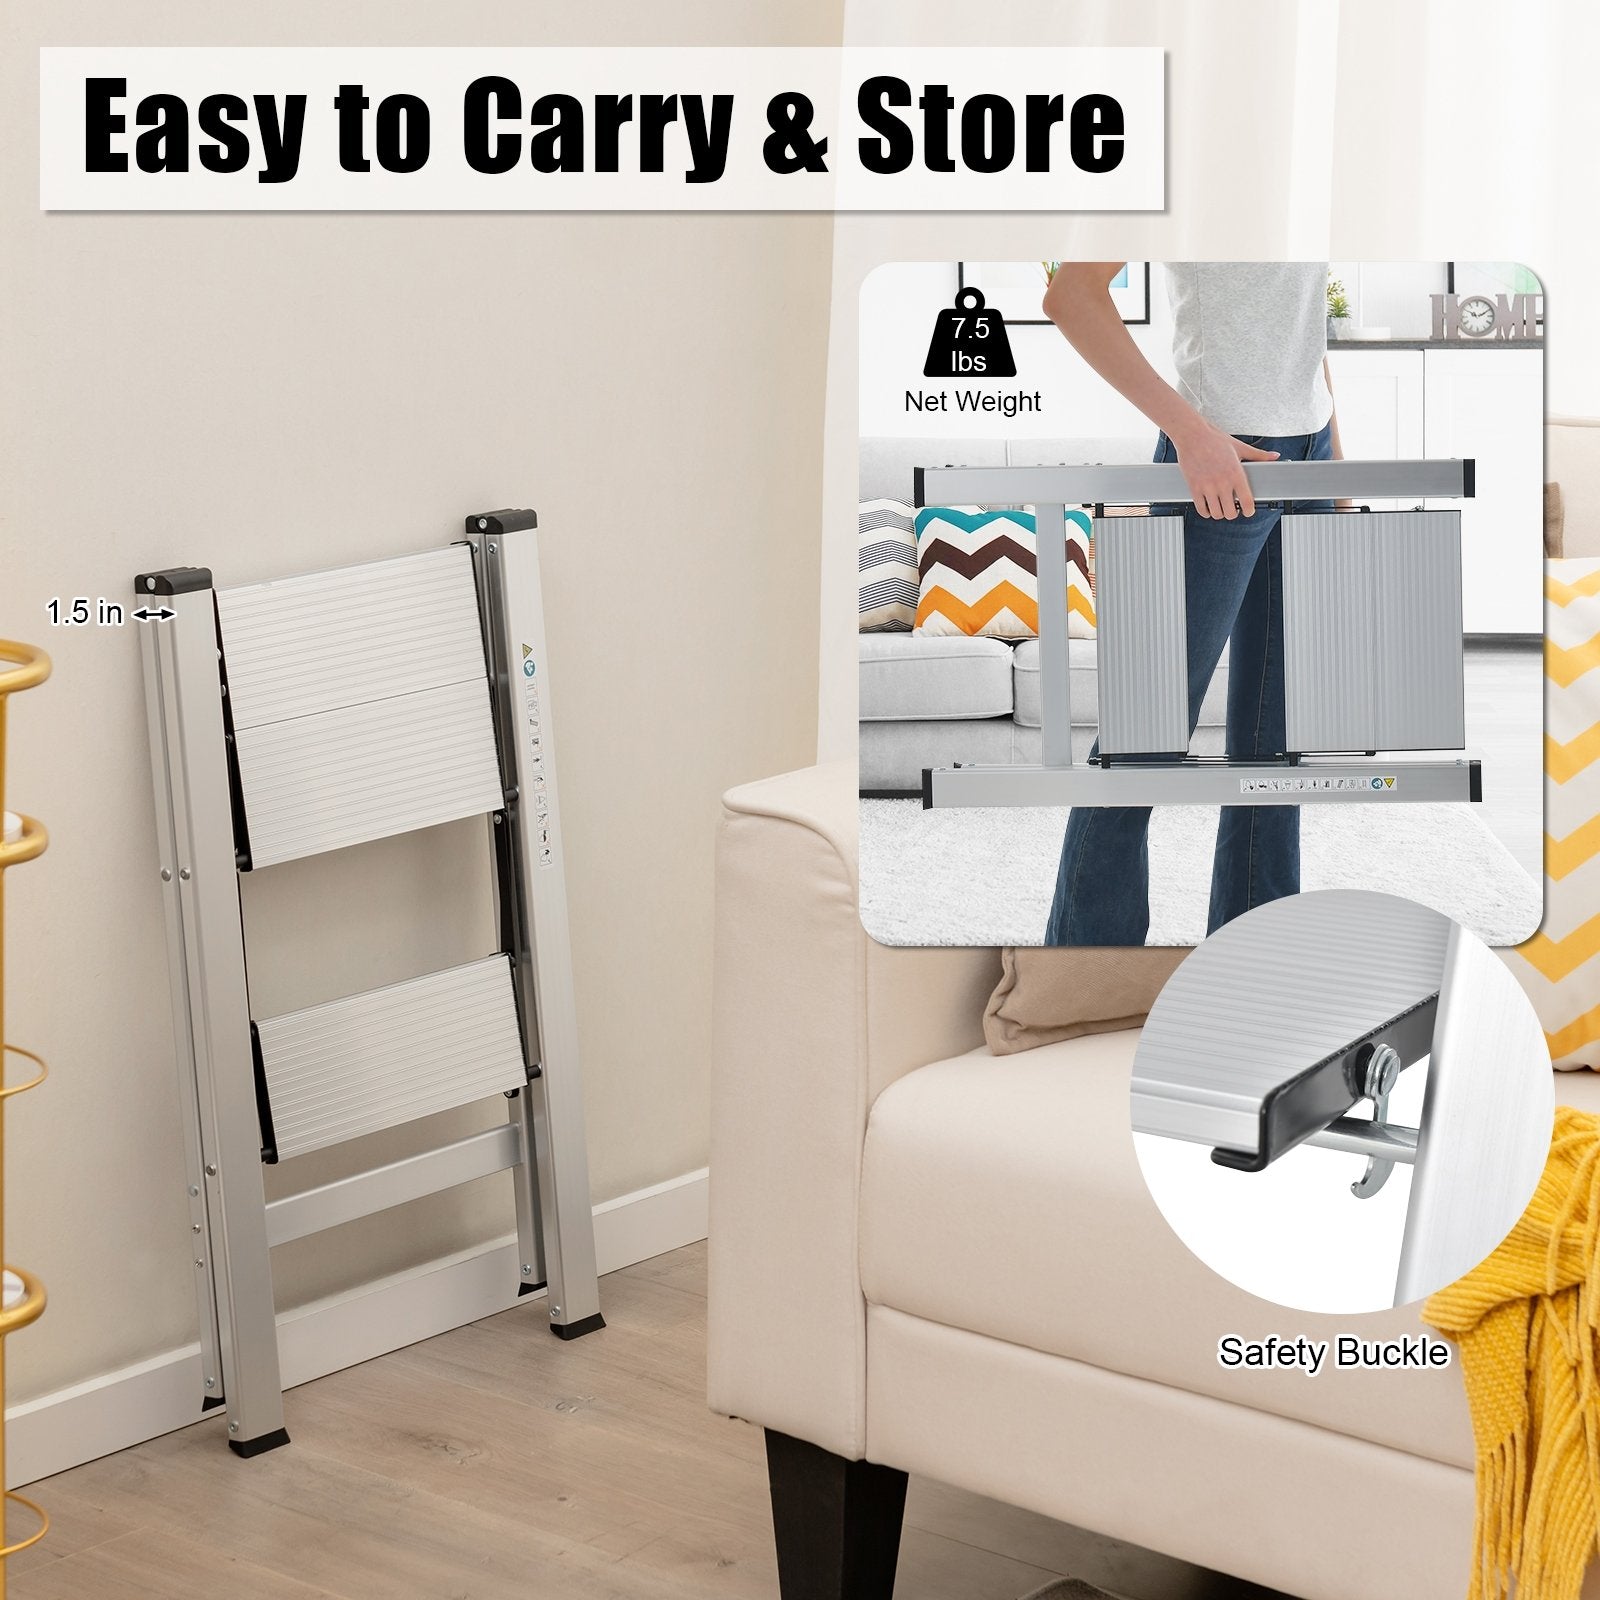 Folding Aluminum 2-Step Ladder with Non-Slip Pedal and Footpads, Silver at Gallery Canada